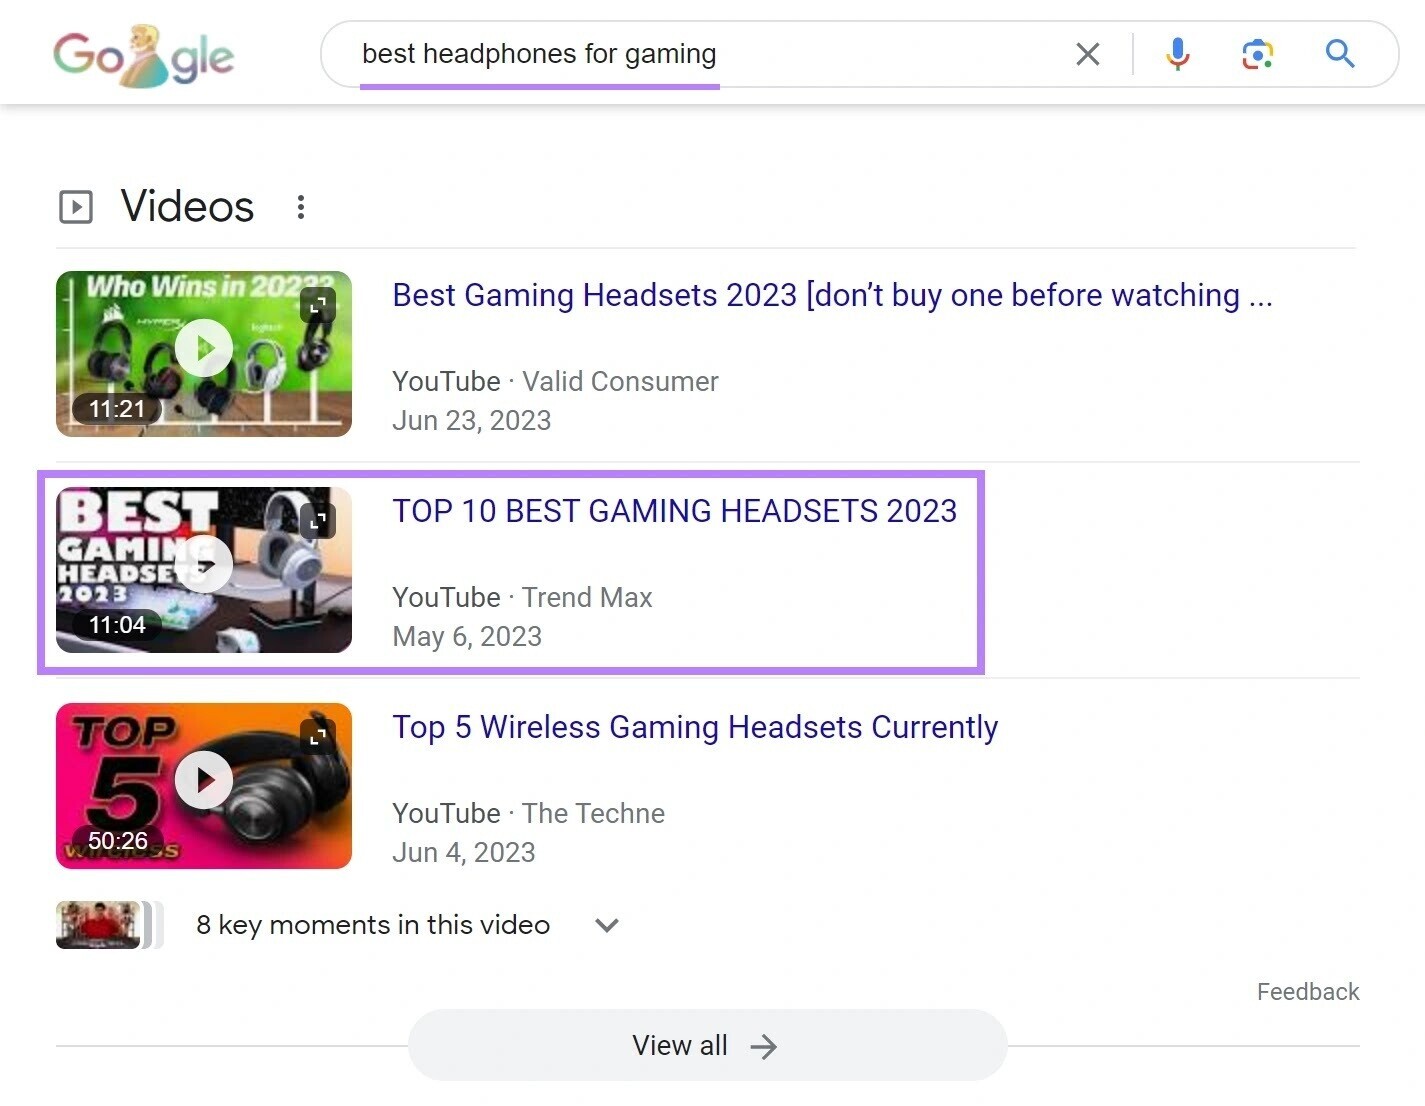 Google results for "best headphones for gaming"